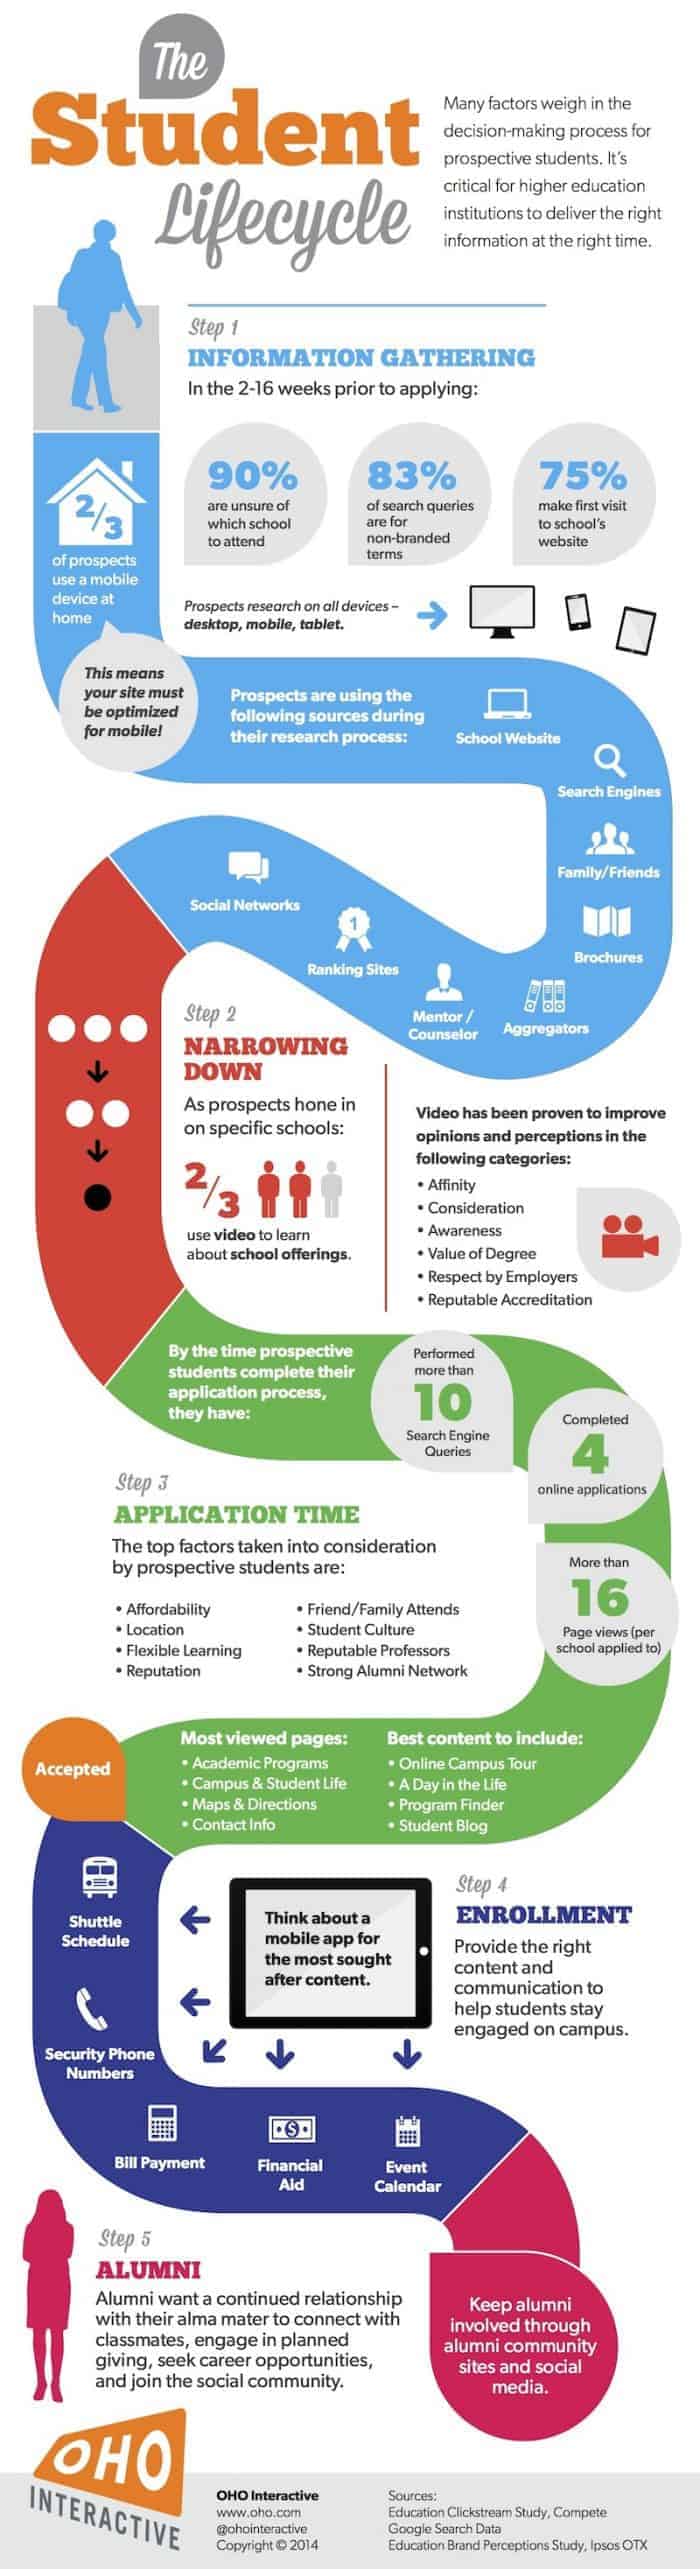 Student Lifecycle Infographic